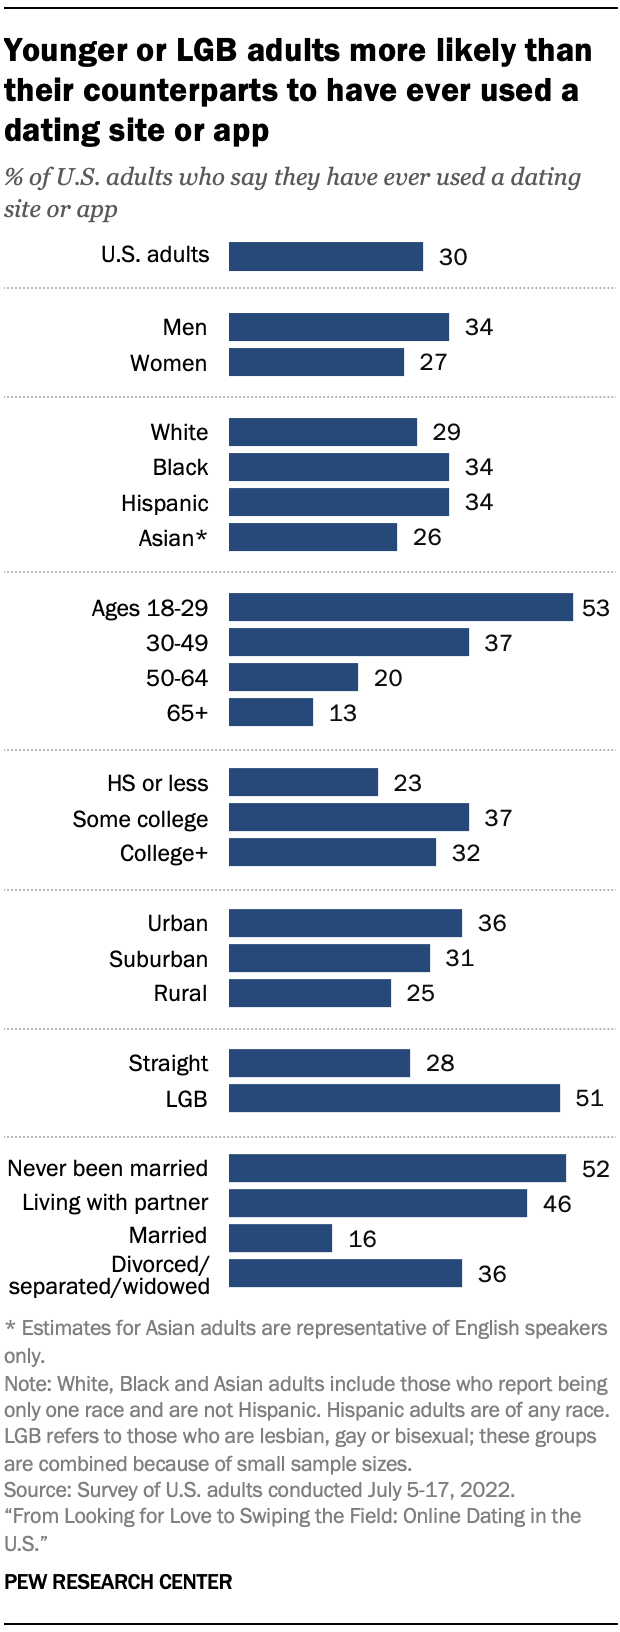 Younger or LGB adults more likely than their counterparts to have ever used a dating site or app